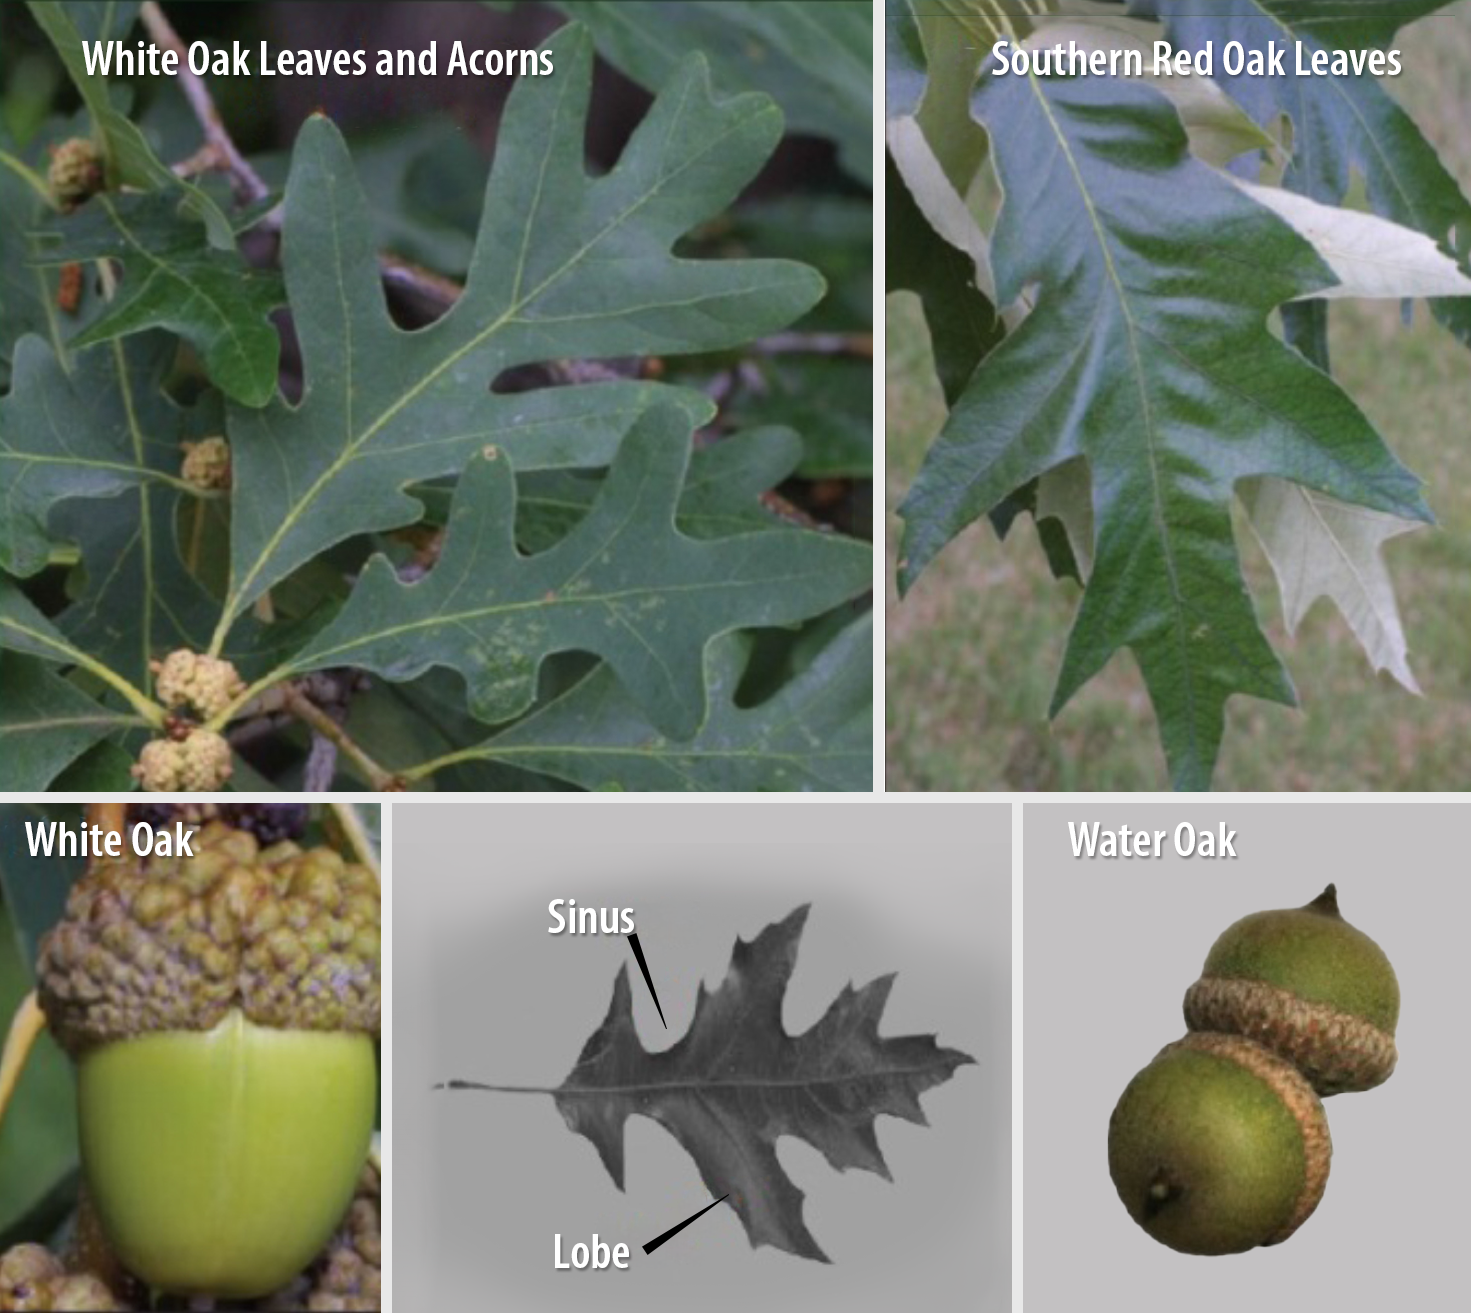 Composite image of leaves and acorns of white oaks, water oaks, and southern red oaks. Descriptions in the text.